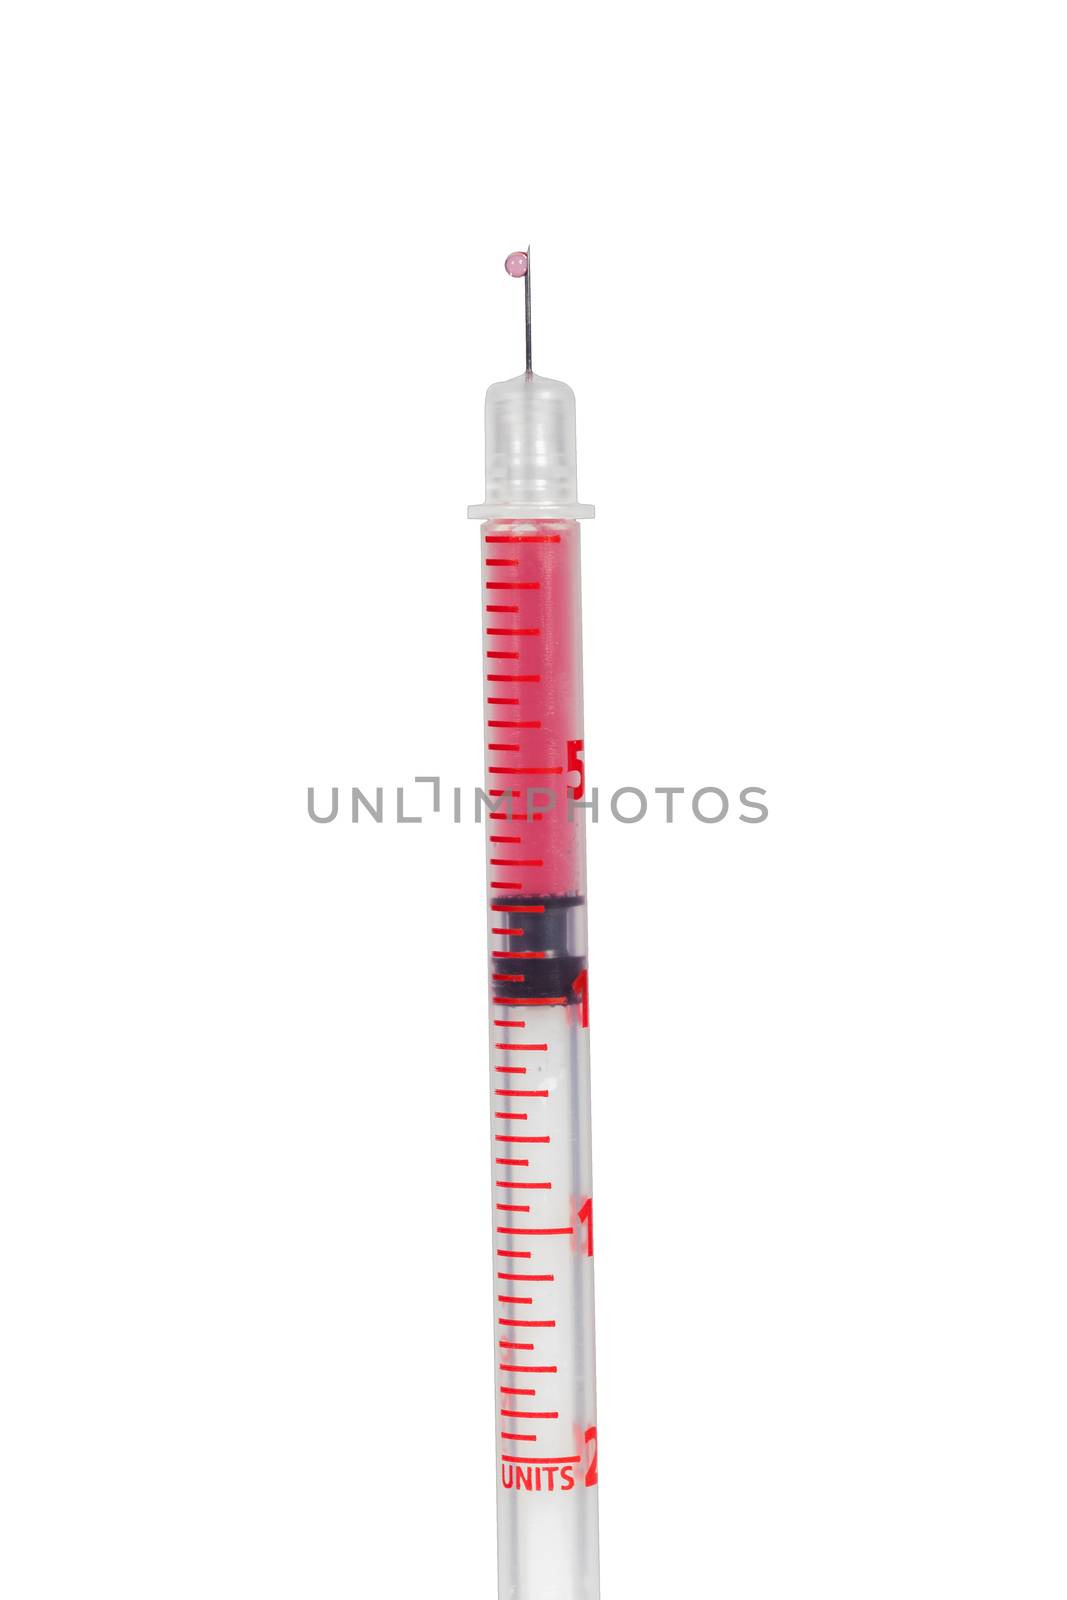 Disposable plastic hypodermic syringe by juniart